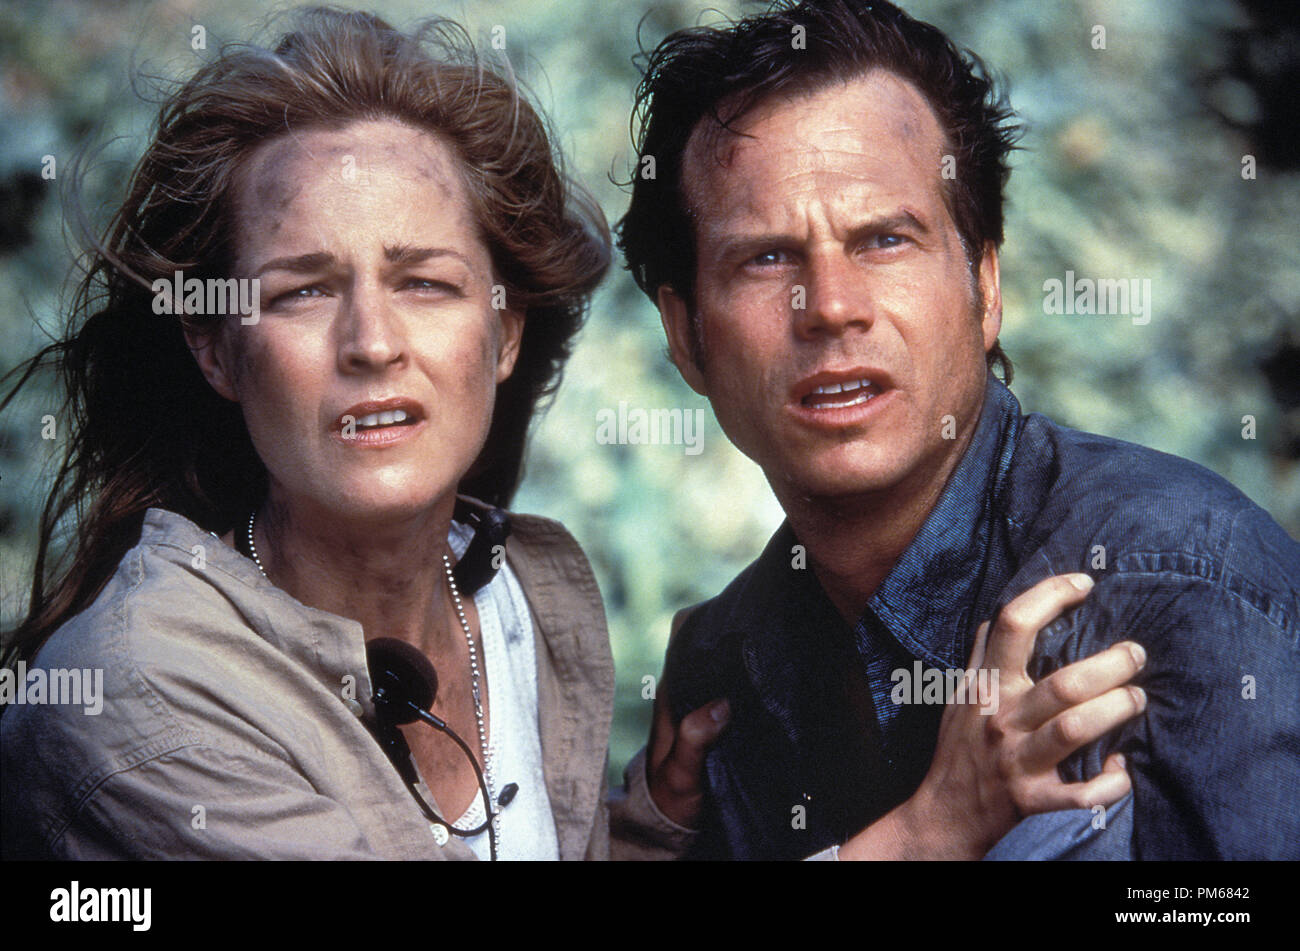 Film Still from 'Twister' Helent Hunt, Bill Paxton © 1996 Warner Brothers Photo Credit: David James  File Reference # 31042056THA  For Editorial Use Only - All Rights Reserved Stock Photo